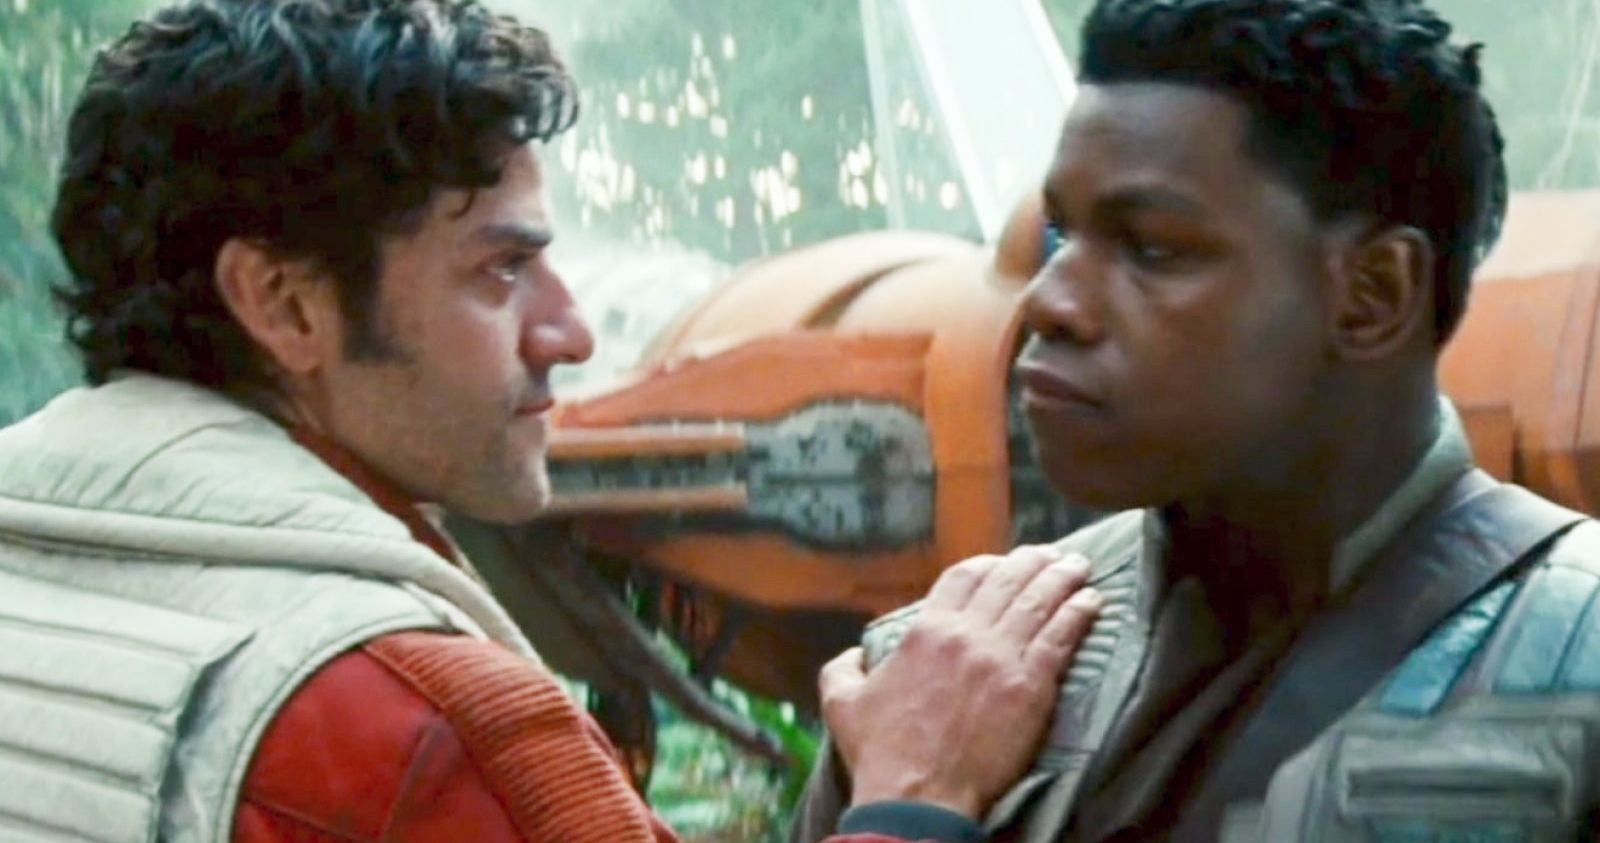 Disney Reached Out to John Boyega After Star Wars Complaints